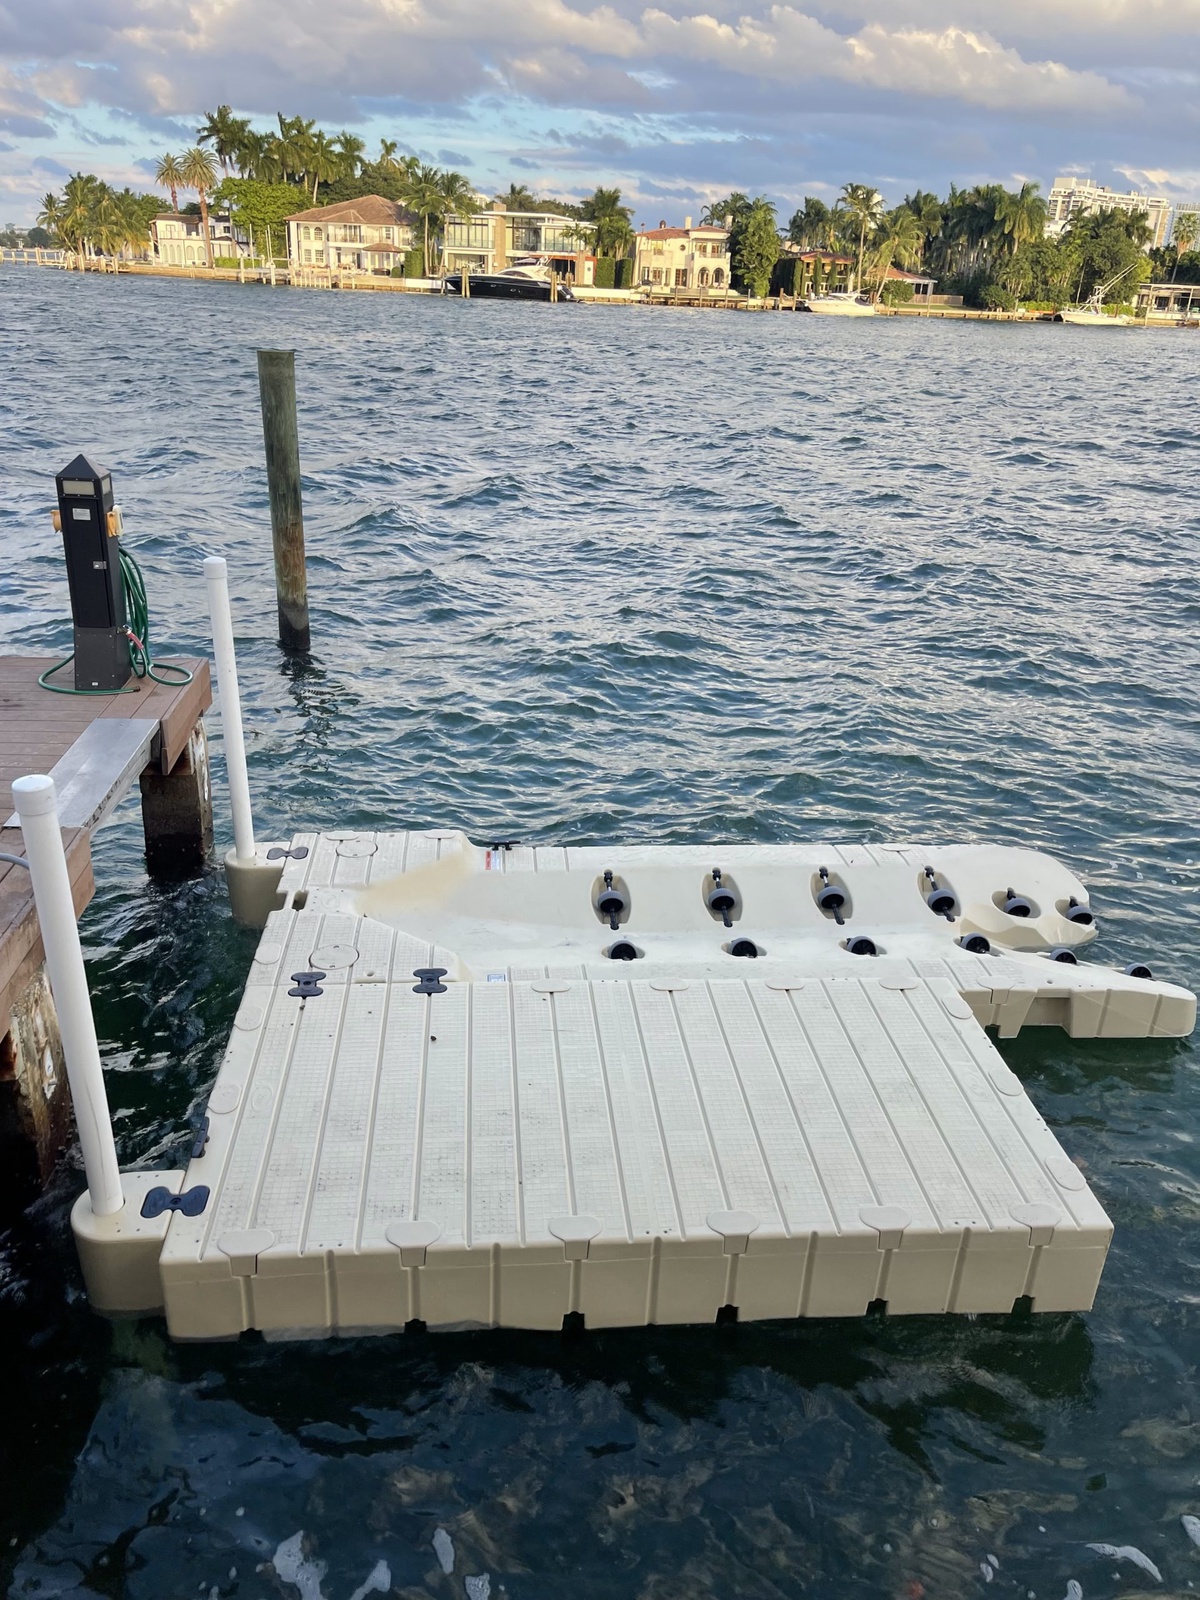 Empire Nautical's Floating Boat Docks for Sale in Miami, Fort Lauderdale, Hollywood, and Jupiter, Florida